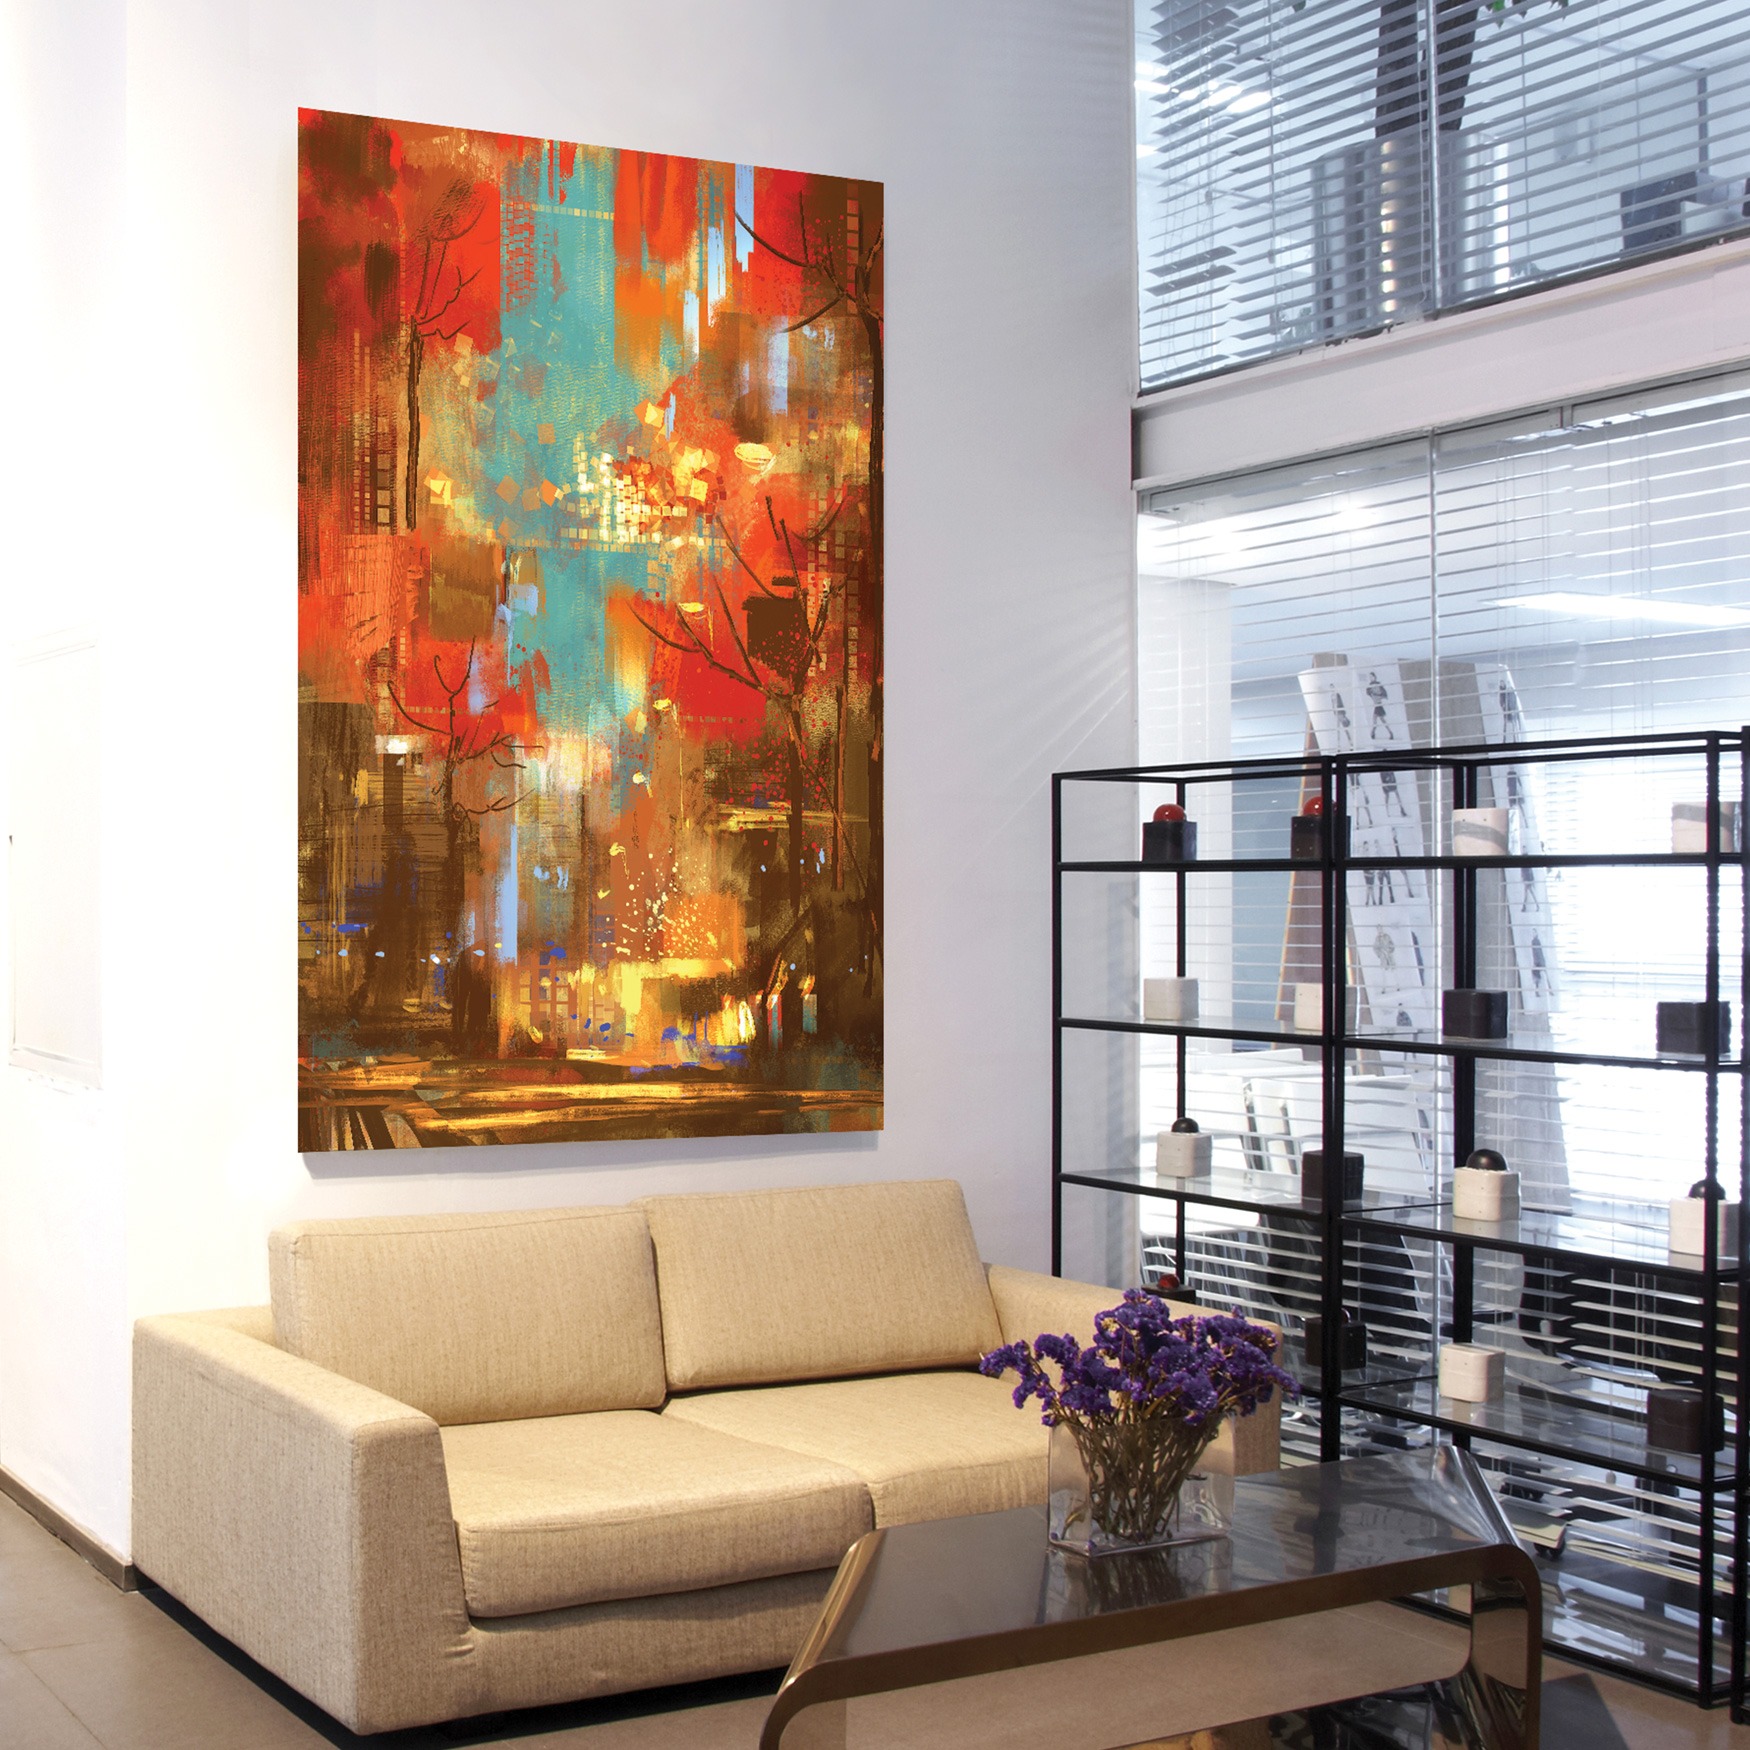 large scale Dye Sublimation printed metal artwork on modern living room wall